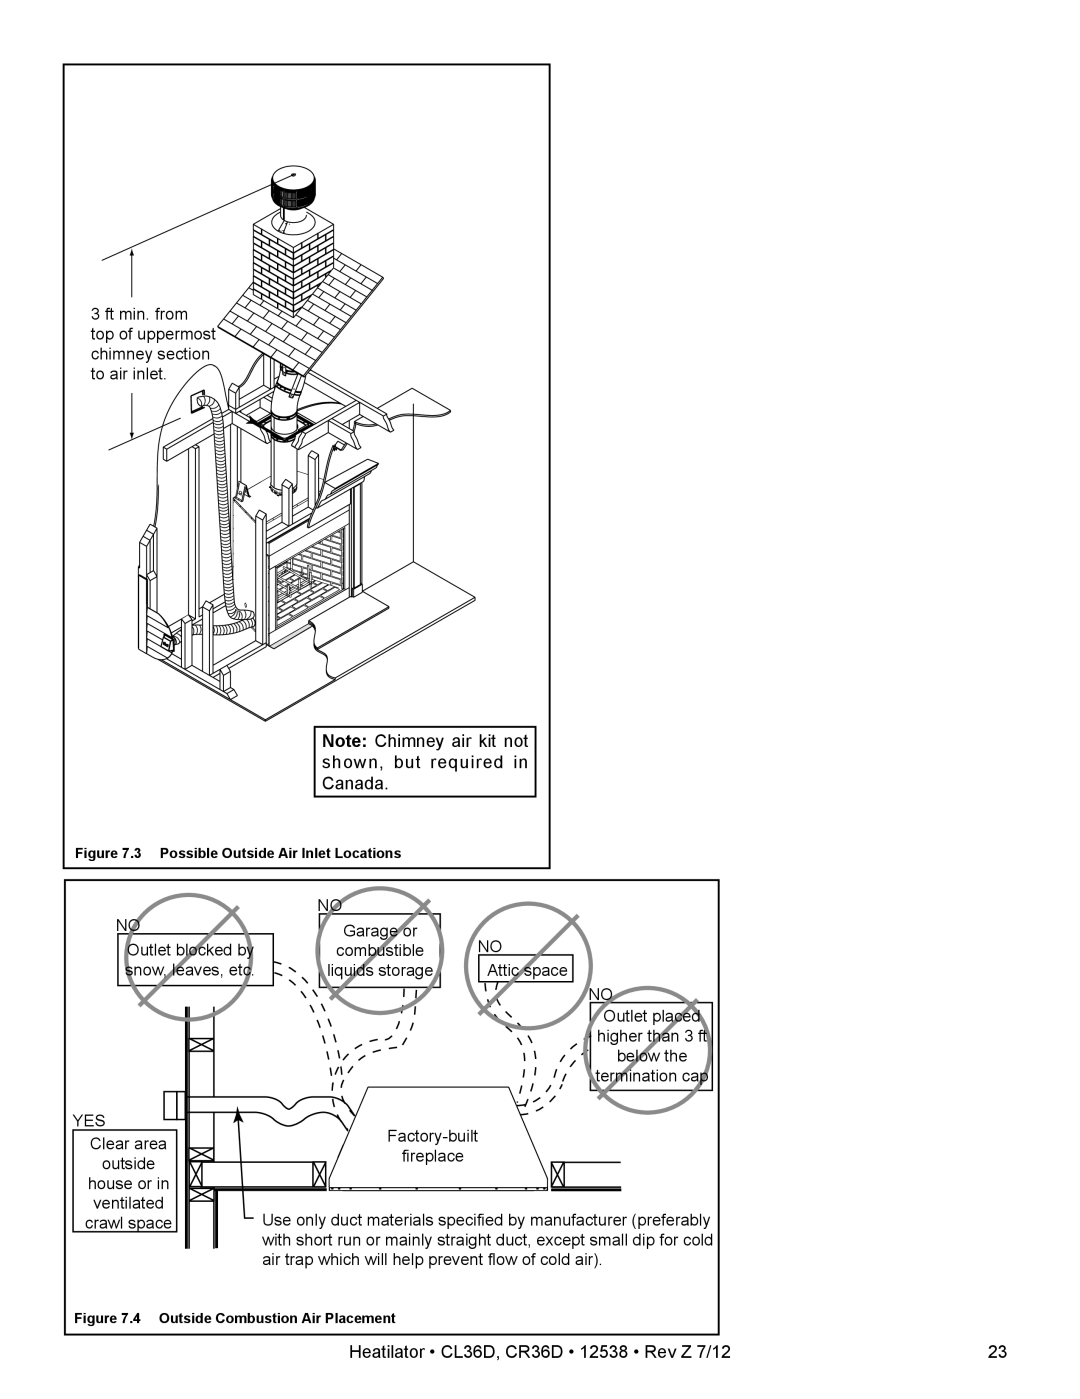 Heatiator Note: Chimney air kit not, shown, but required in, Canada, Heatilator • CL36D, CR36D • 12538 • Rev Z 7/12 